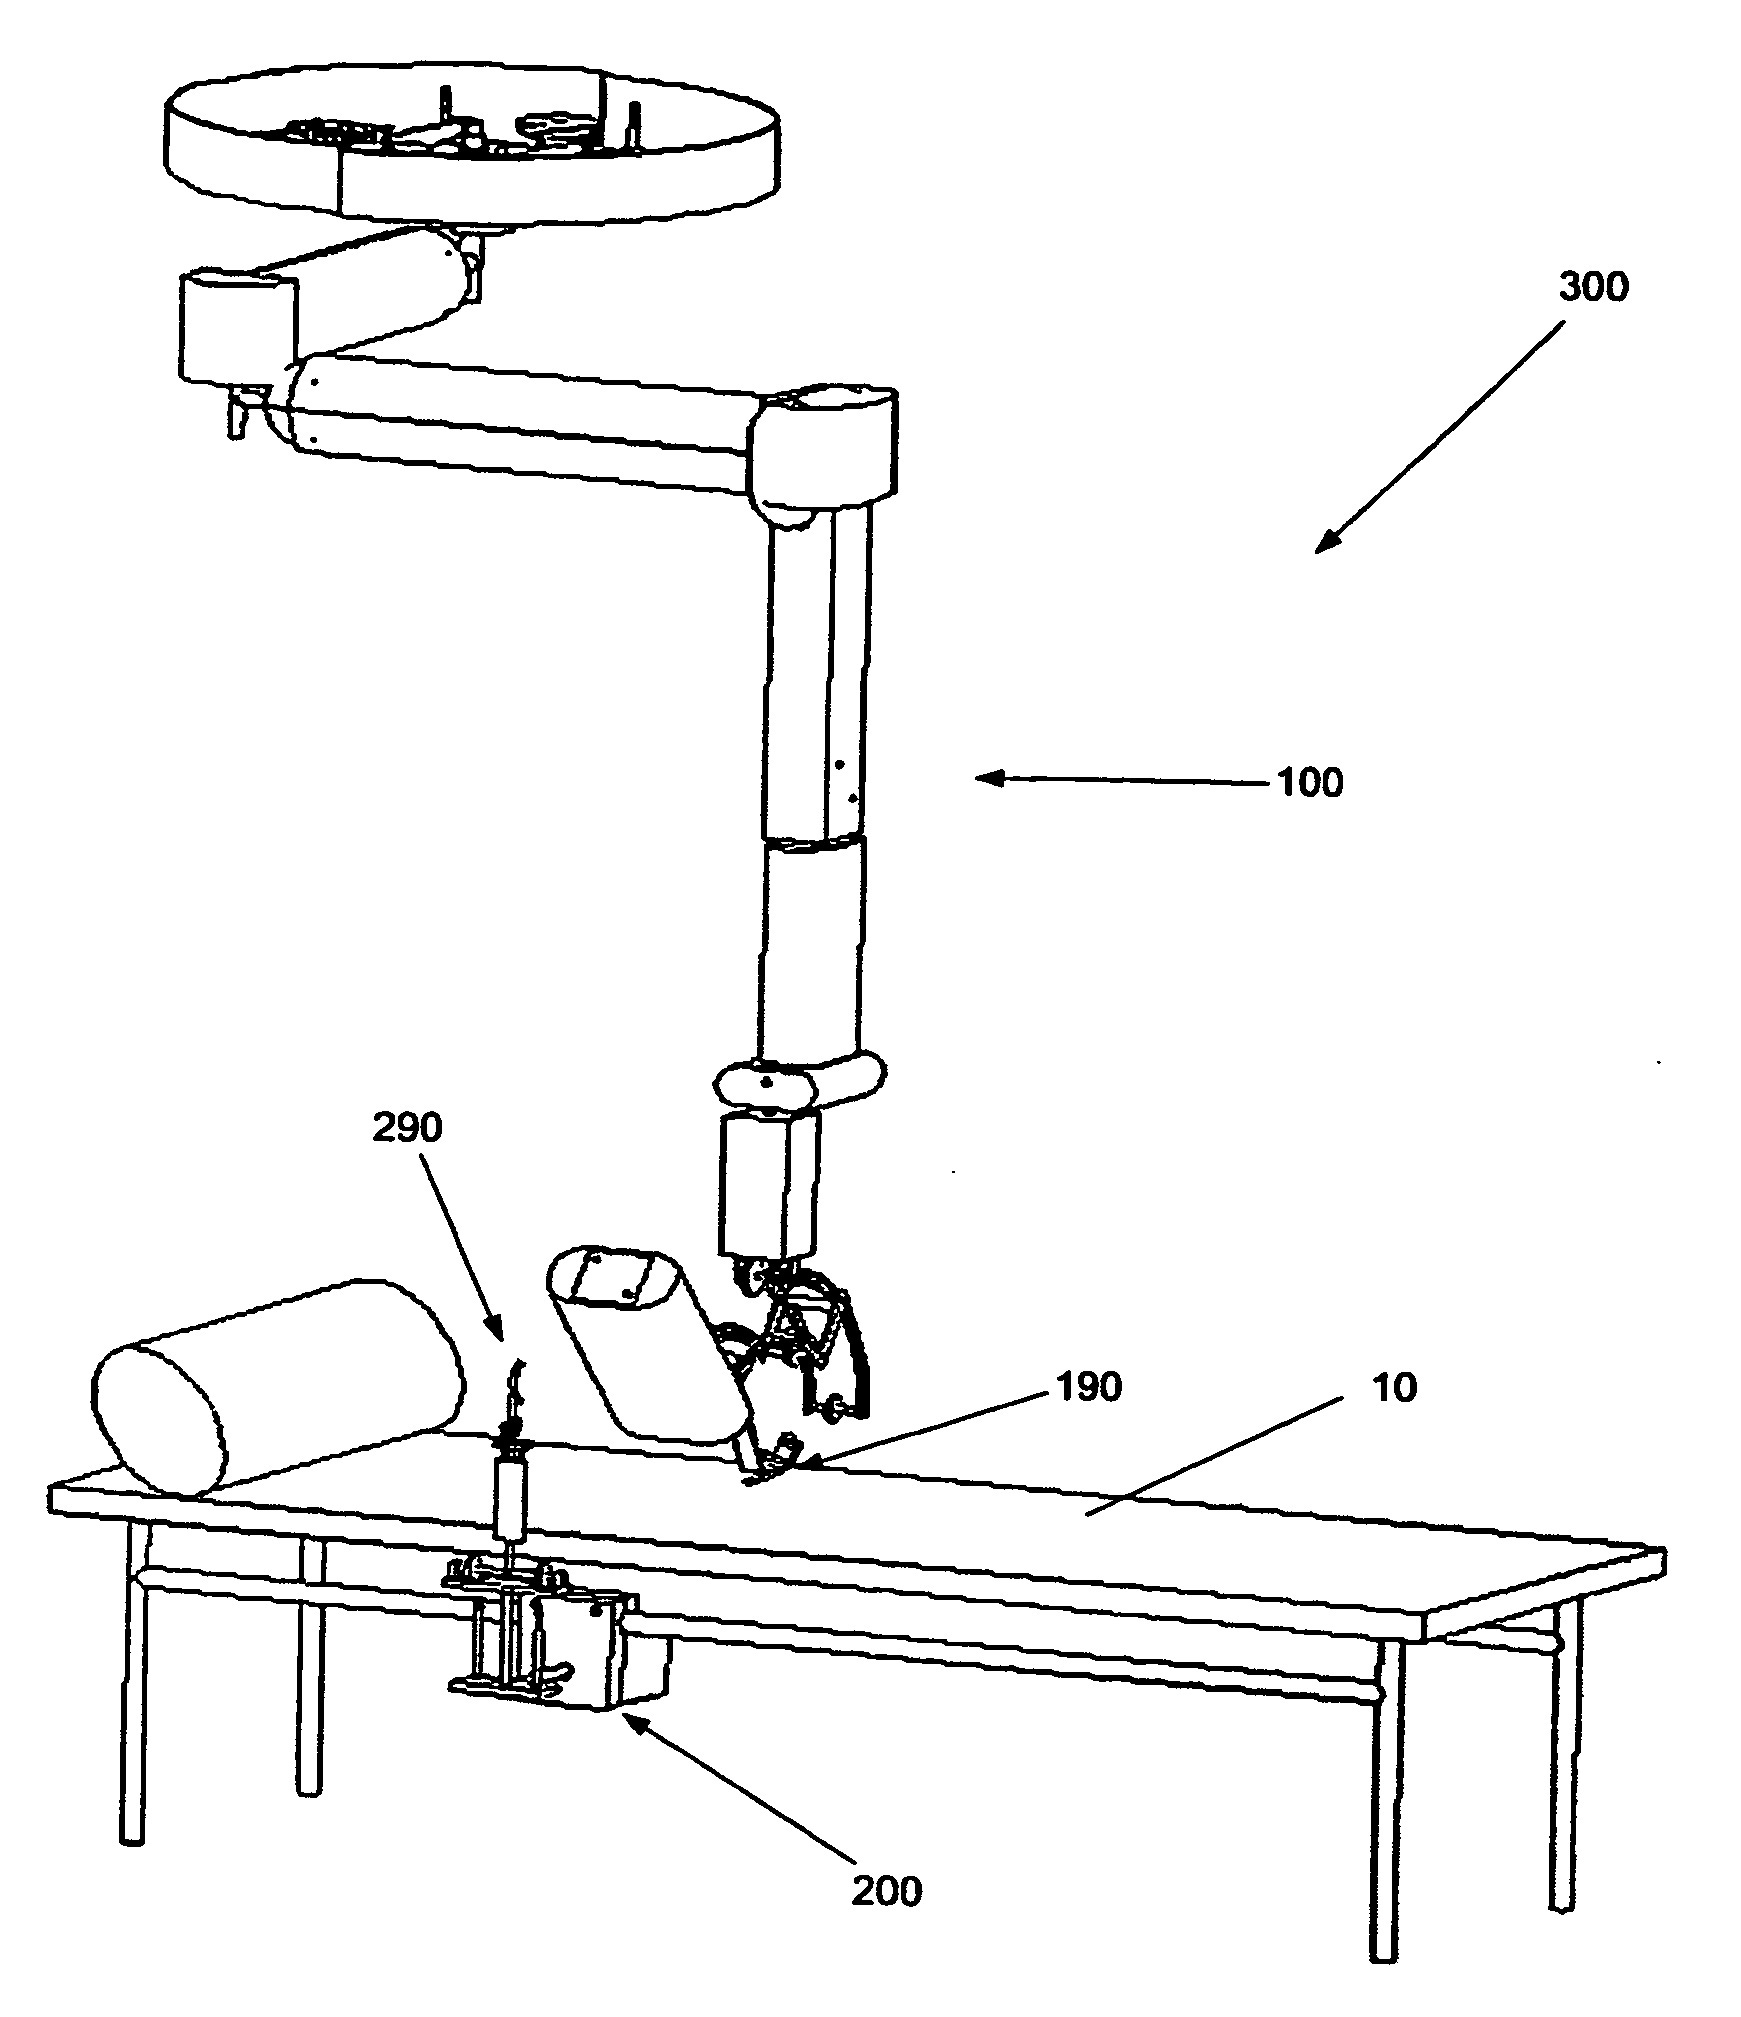 Robotic Arm for Controlling the Movement of Human Arm